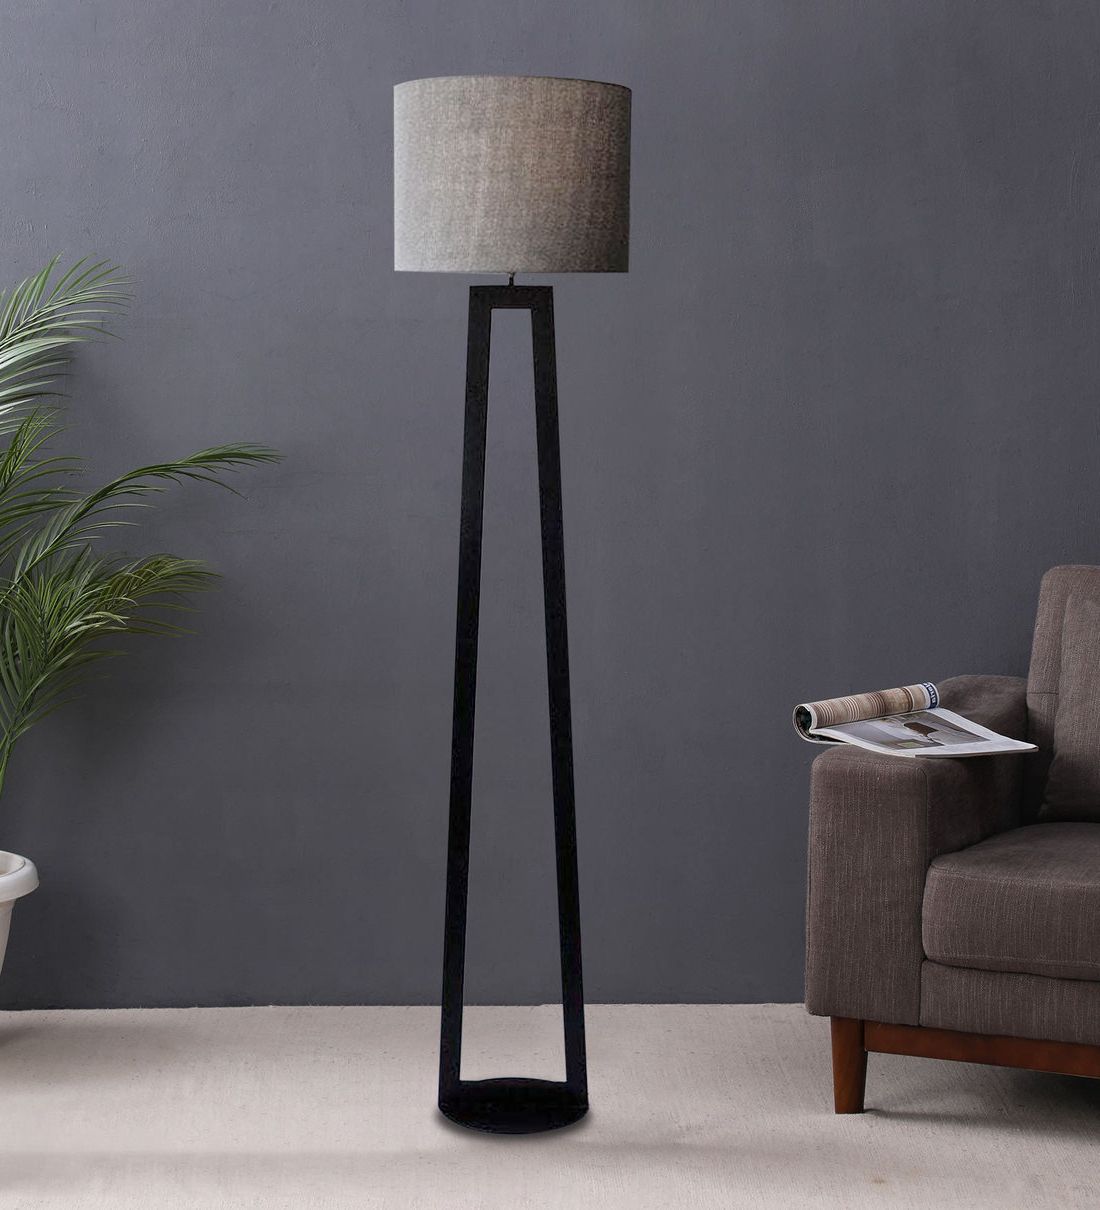 Buy Grey Fabric Shade Floor Lamp With Black Basethe Black Steel Online  – Club Floor Lamps – Floor Lamps – Lamps And Lighting – Pepperfry Product For Grey Shade Floor Lamps (Gallery 19 of 20)